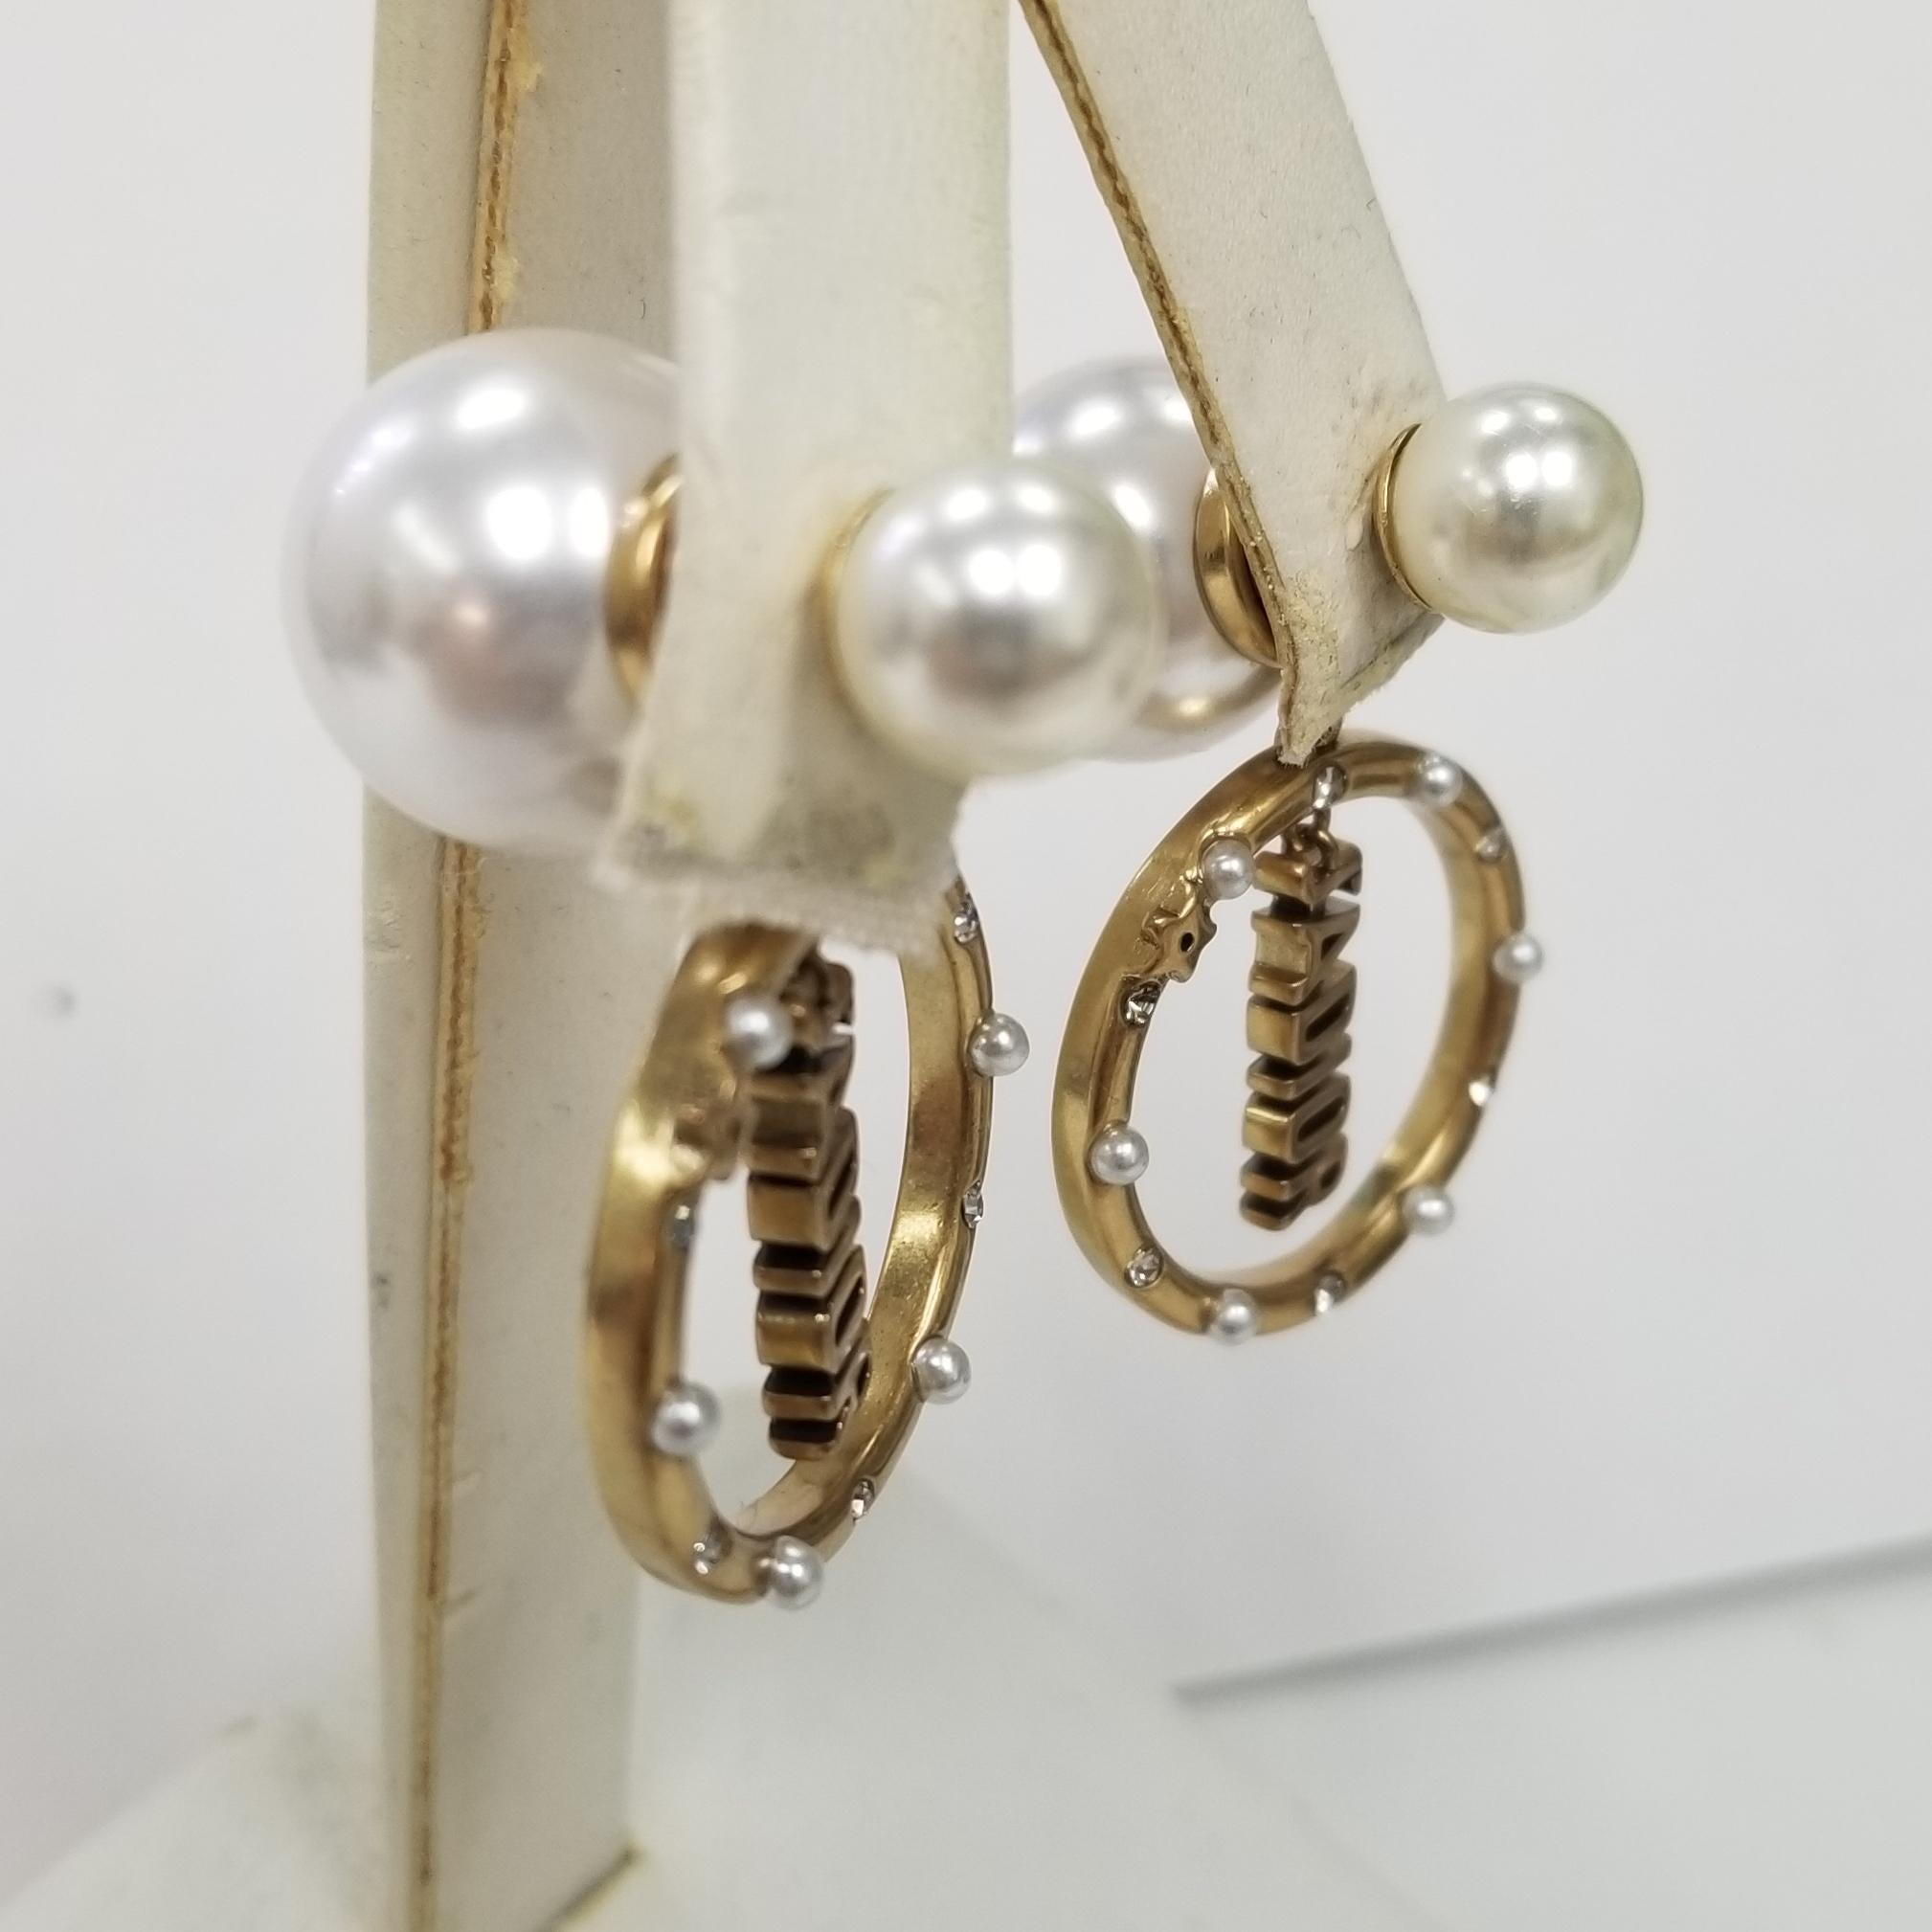 Christian Dior large & small fuax pearl jadior w/ crystal set in circle earring.
Christian Dior Faux Pearl Mise En Dior Tribal Earrings